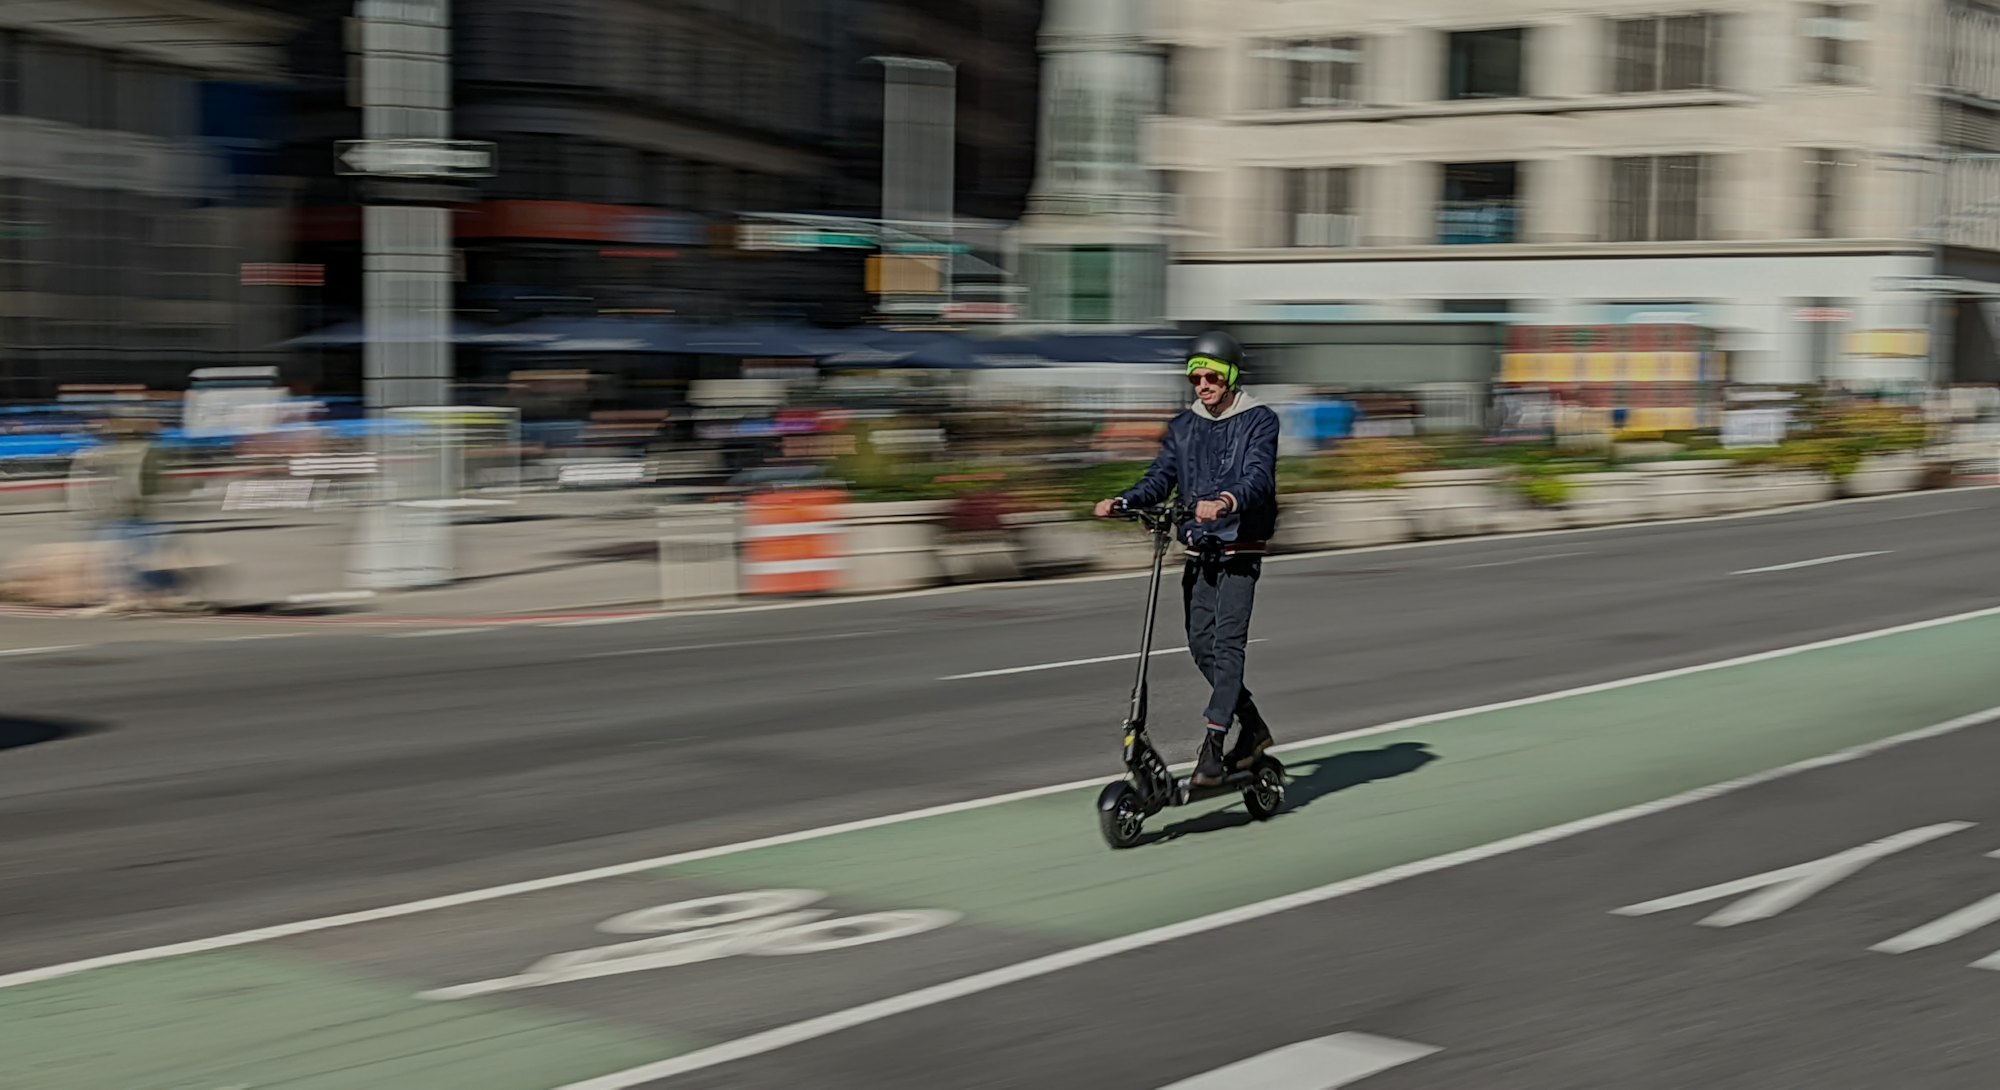 A man riding Apollo Ghost electric scooter. EV. Electric vehicles. EVs. e-scooter